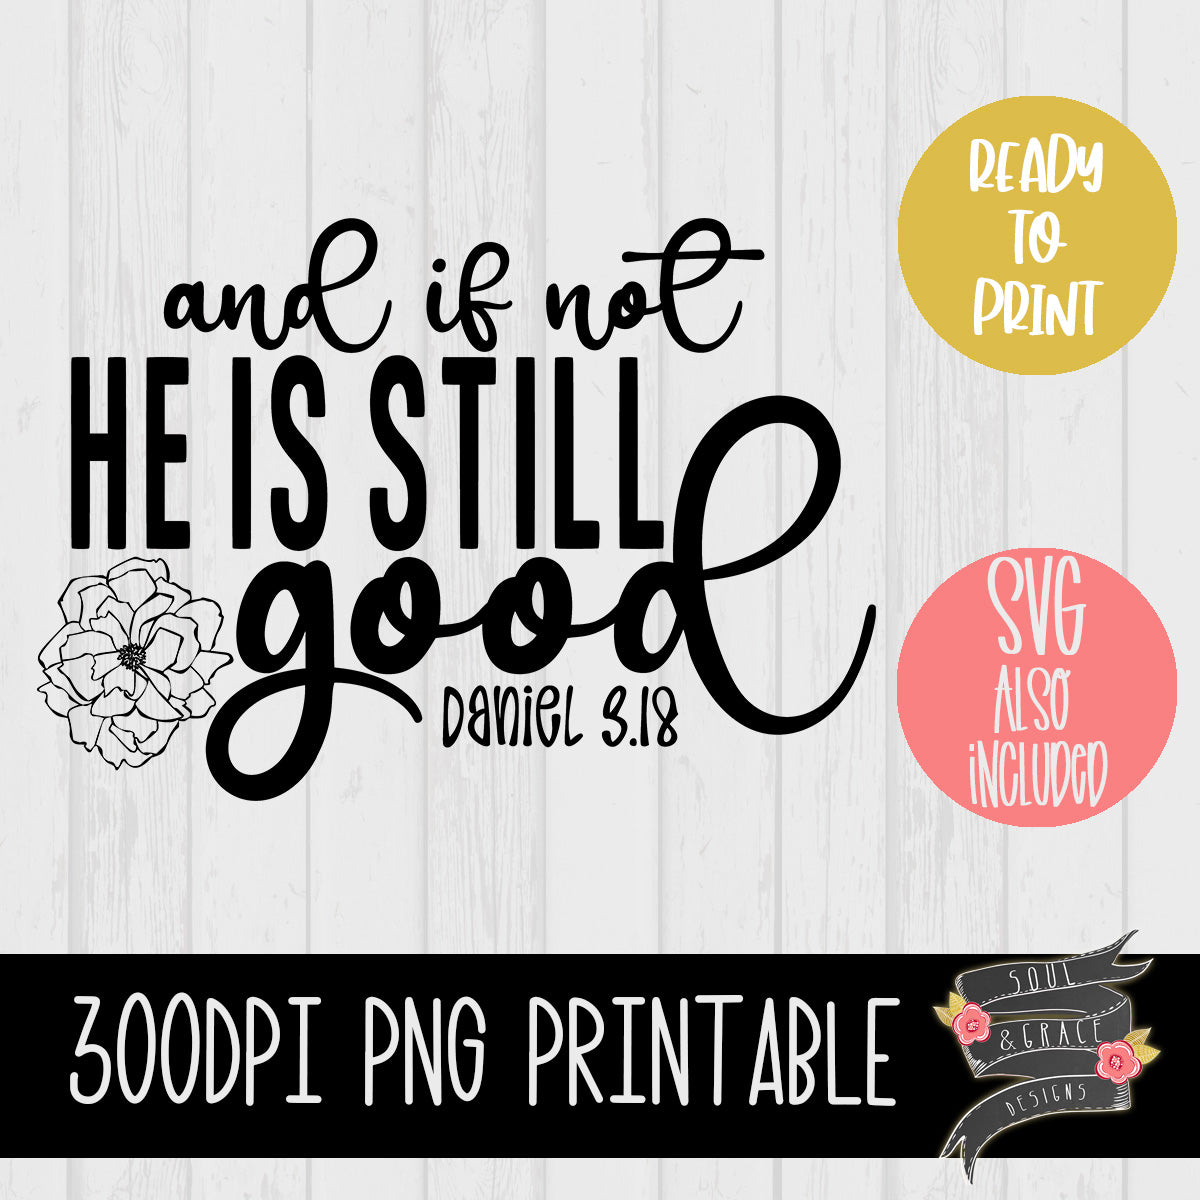 and if not he is still good [Daniel 3:18] word art